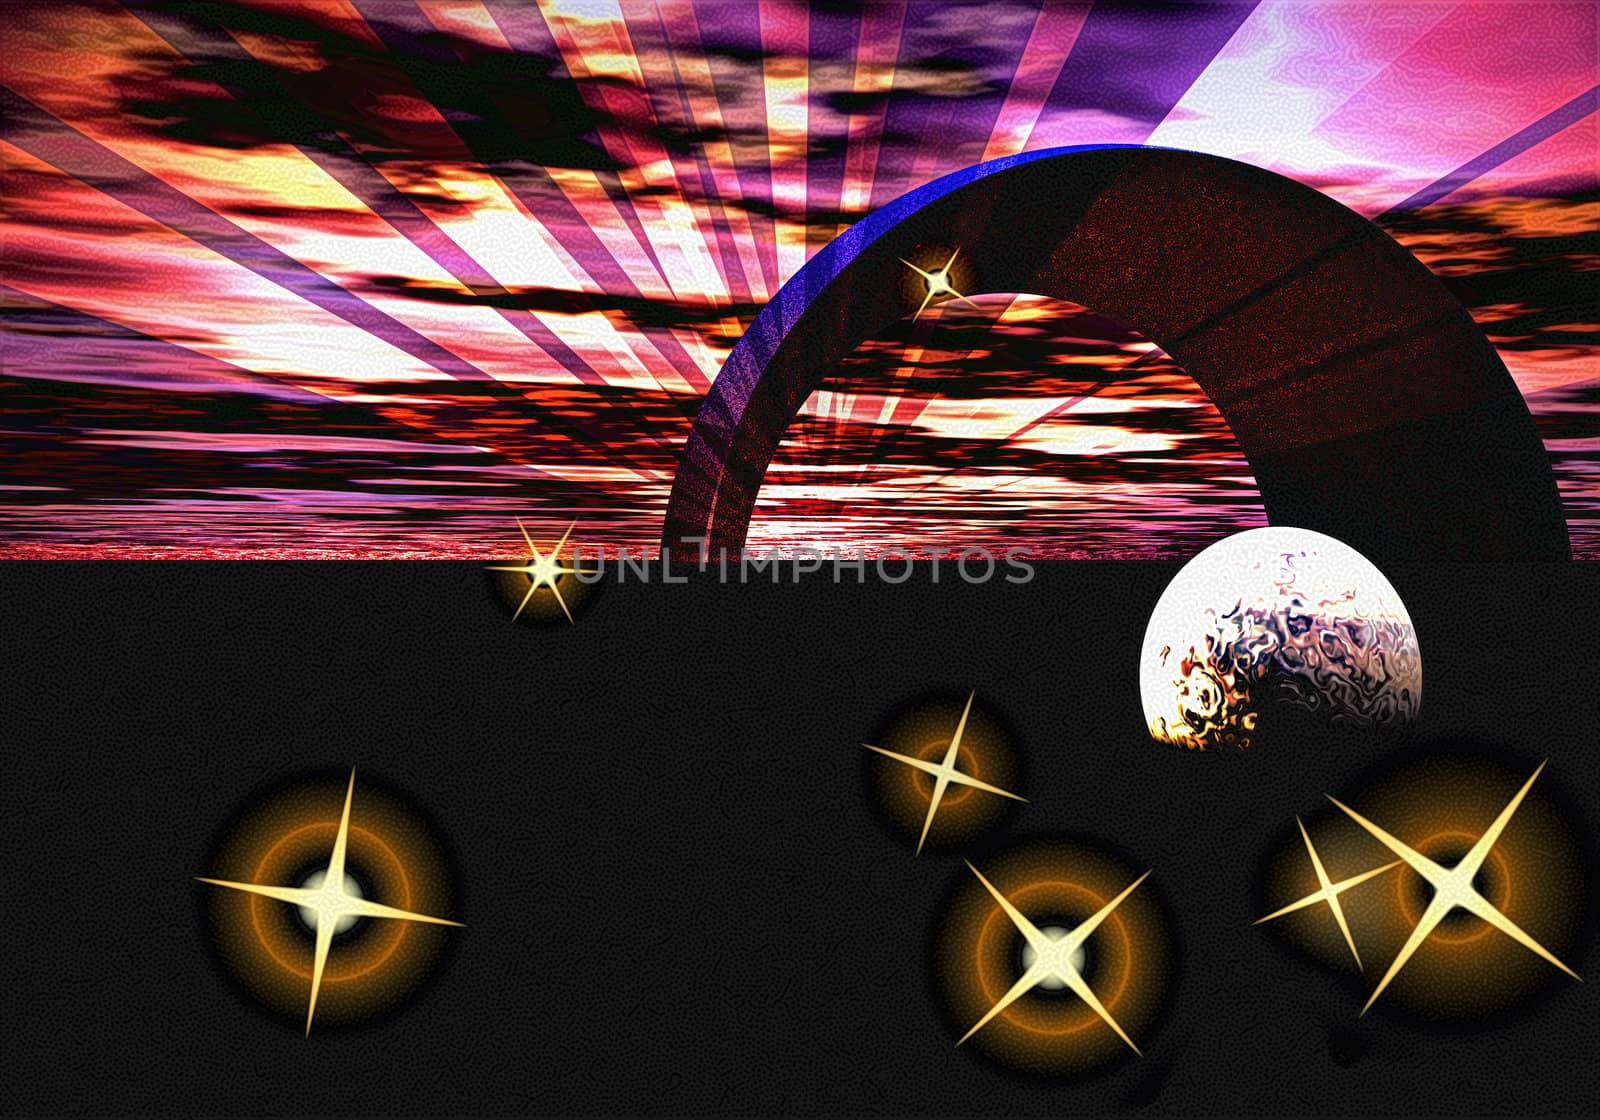 abstract creative symbolic image of cosmic objects